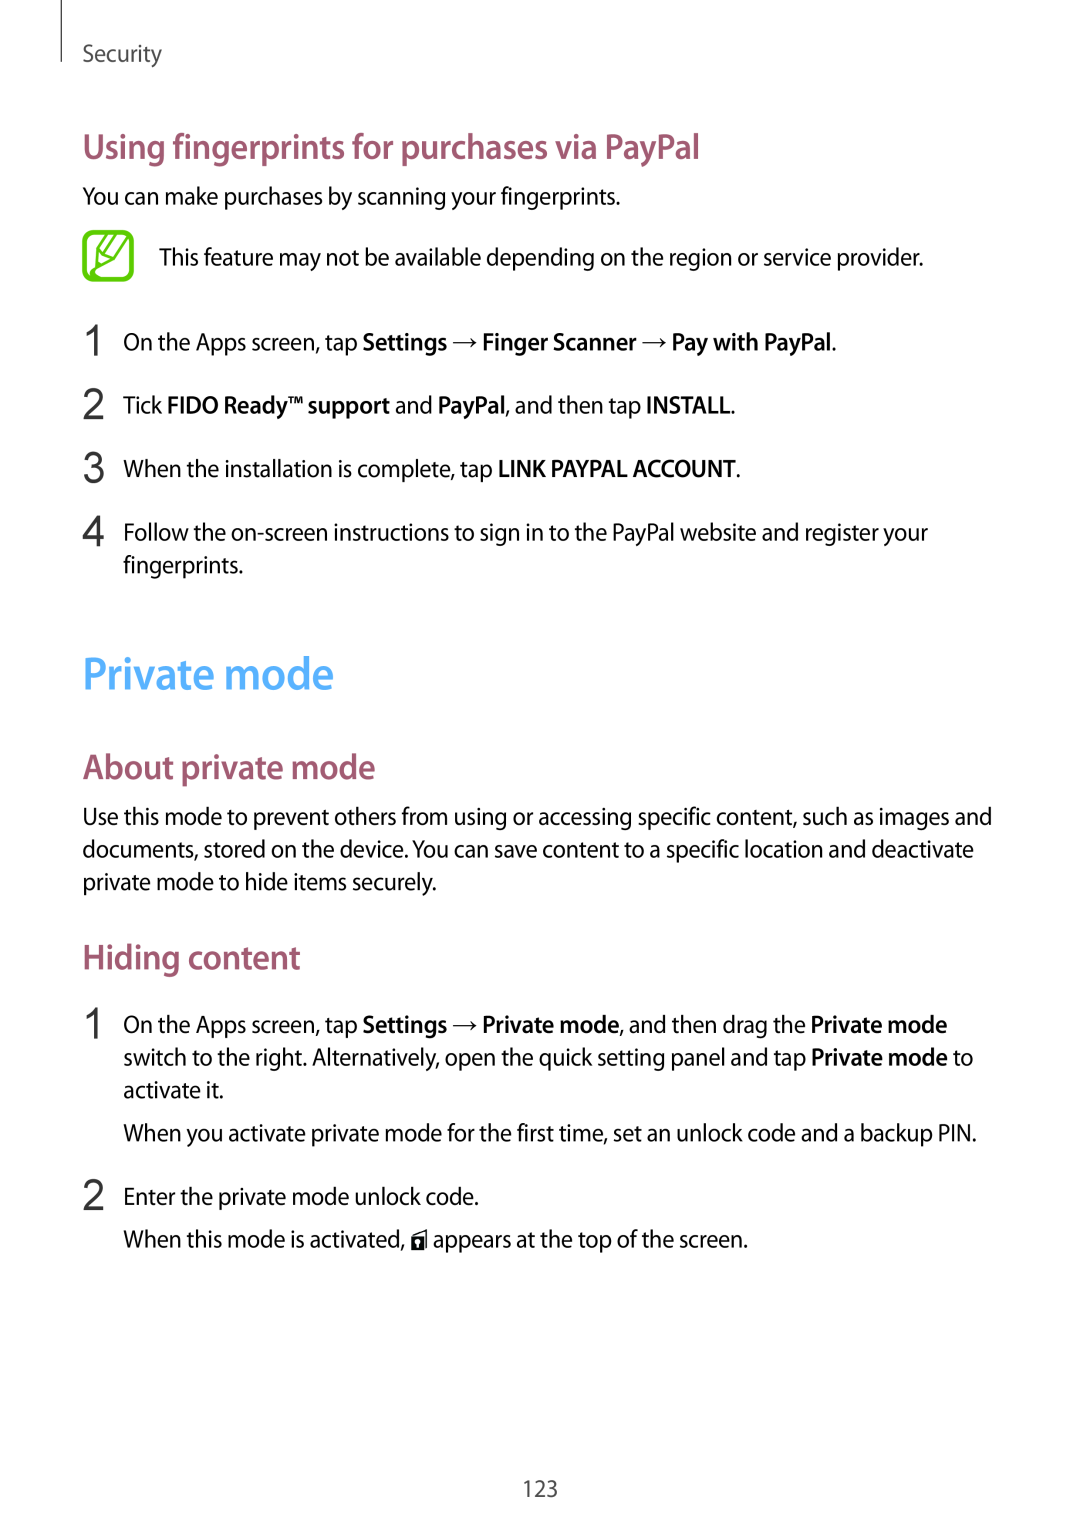 Samsung SM-G901FZWABAL manual Private mode, Using fingerprints for purchases via PayPal, About private mode, Hiding content 